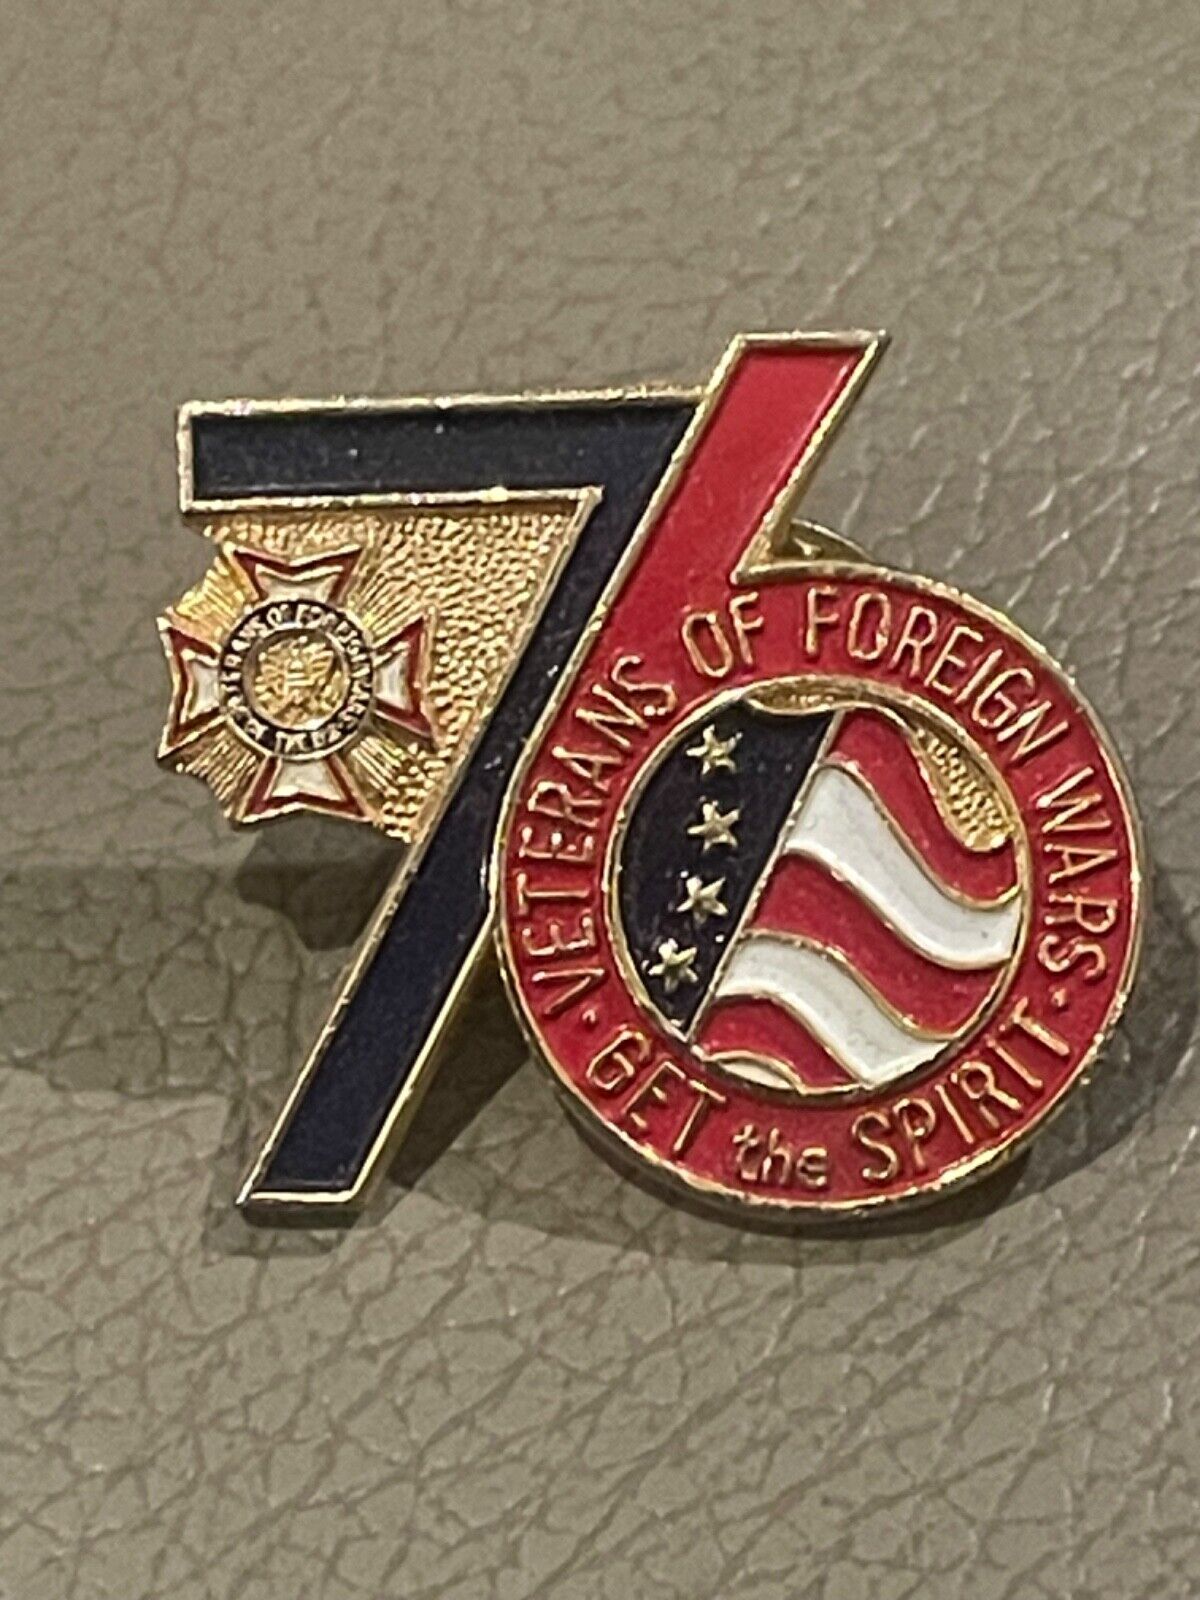 Veterans of Foreign Wars - Get the Spirit Pin - 1976 - Vintage